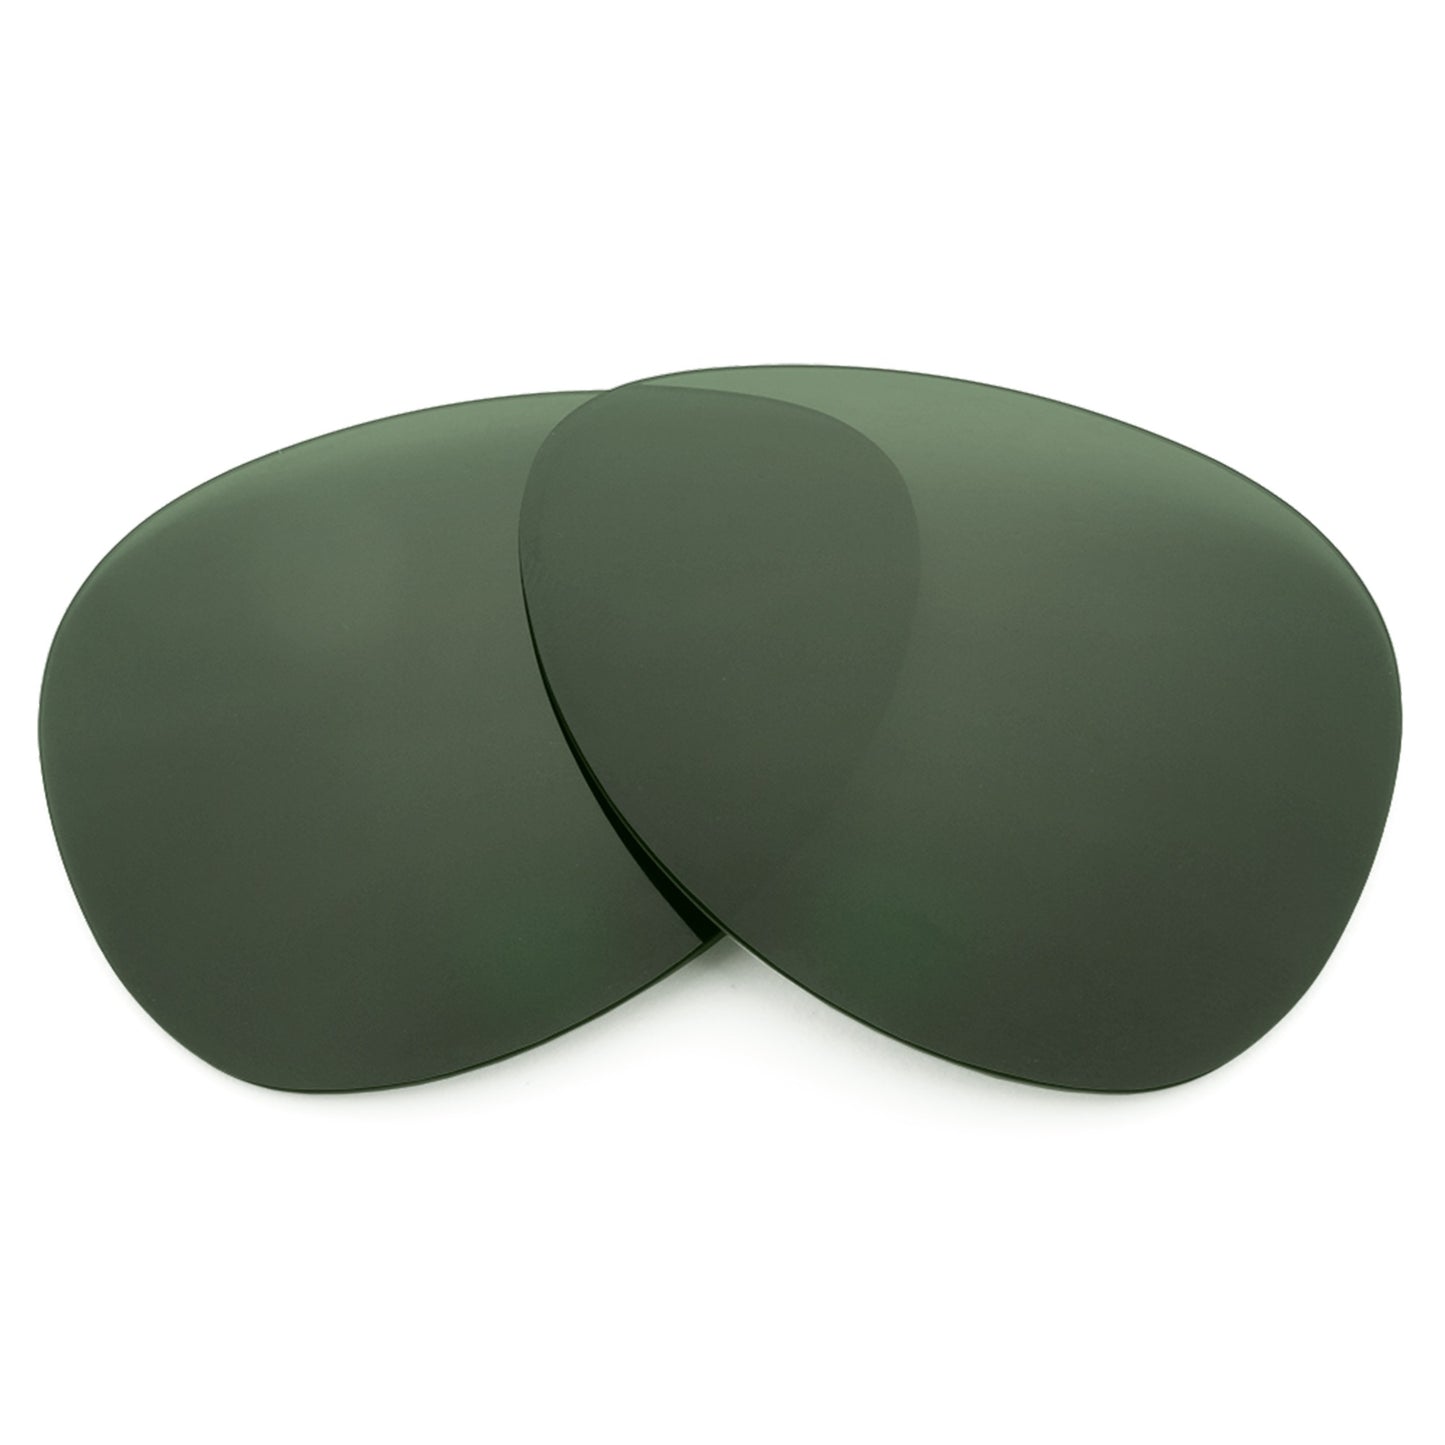 Revant replacement lenses for Ray-Ban RB4147 56mm Non-Polarized Gray Green